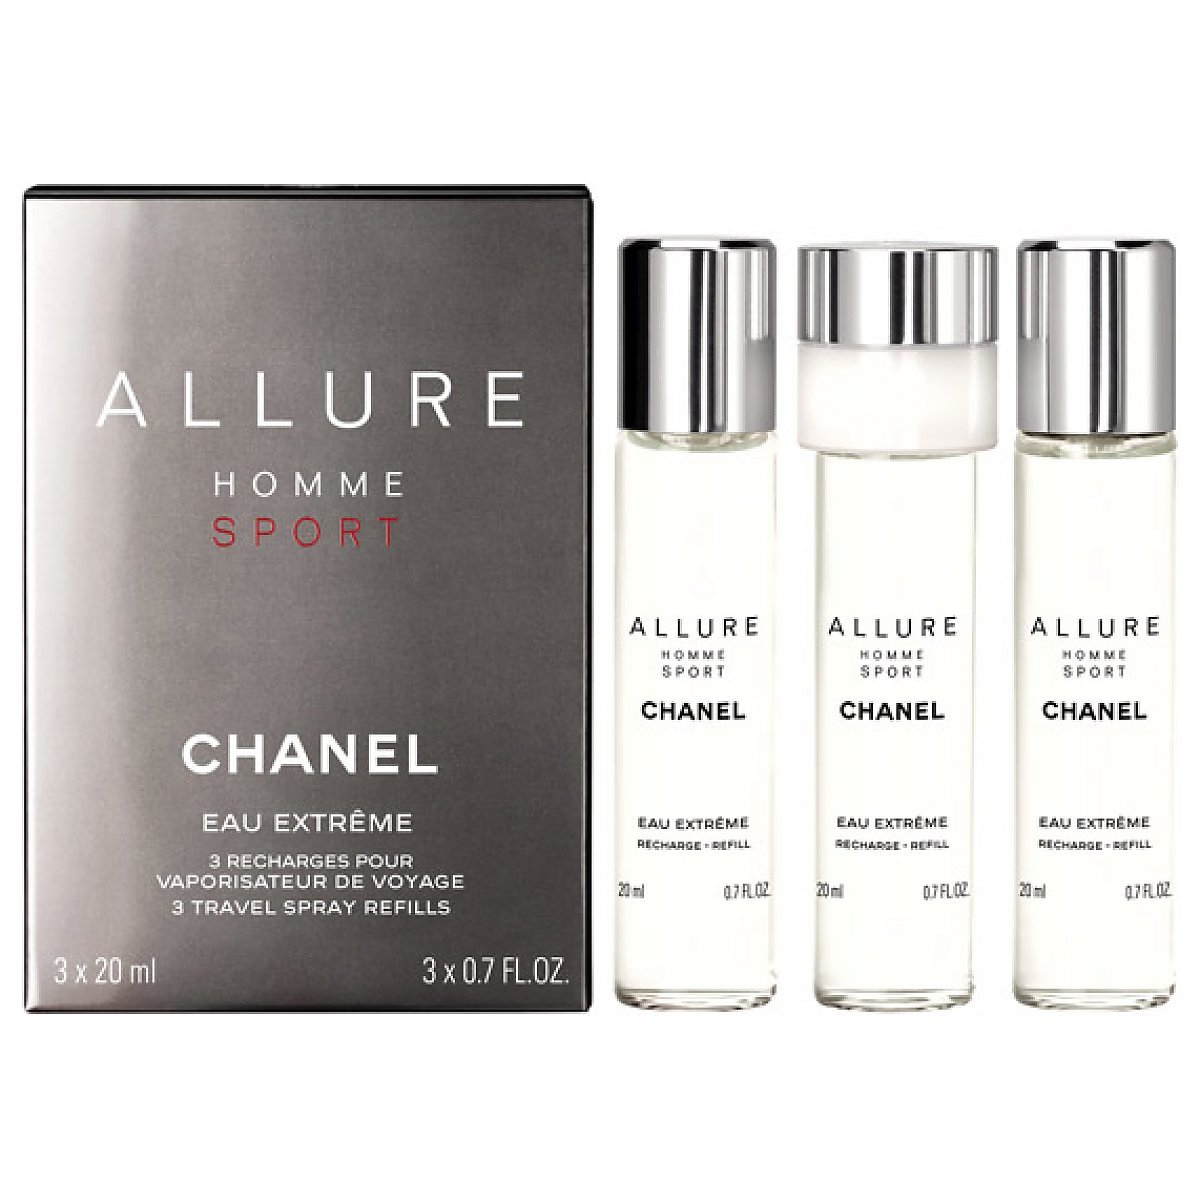 Allure homme sport eau. Chanel Allure homme Sport Eau extreme 20 ml. Allure Sport Eau extreme 3x20. Allure homme Sport Eau extreme EDP 3x20ml Refills. Шанель Allure homme 20 мл.